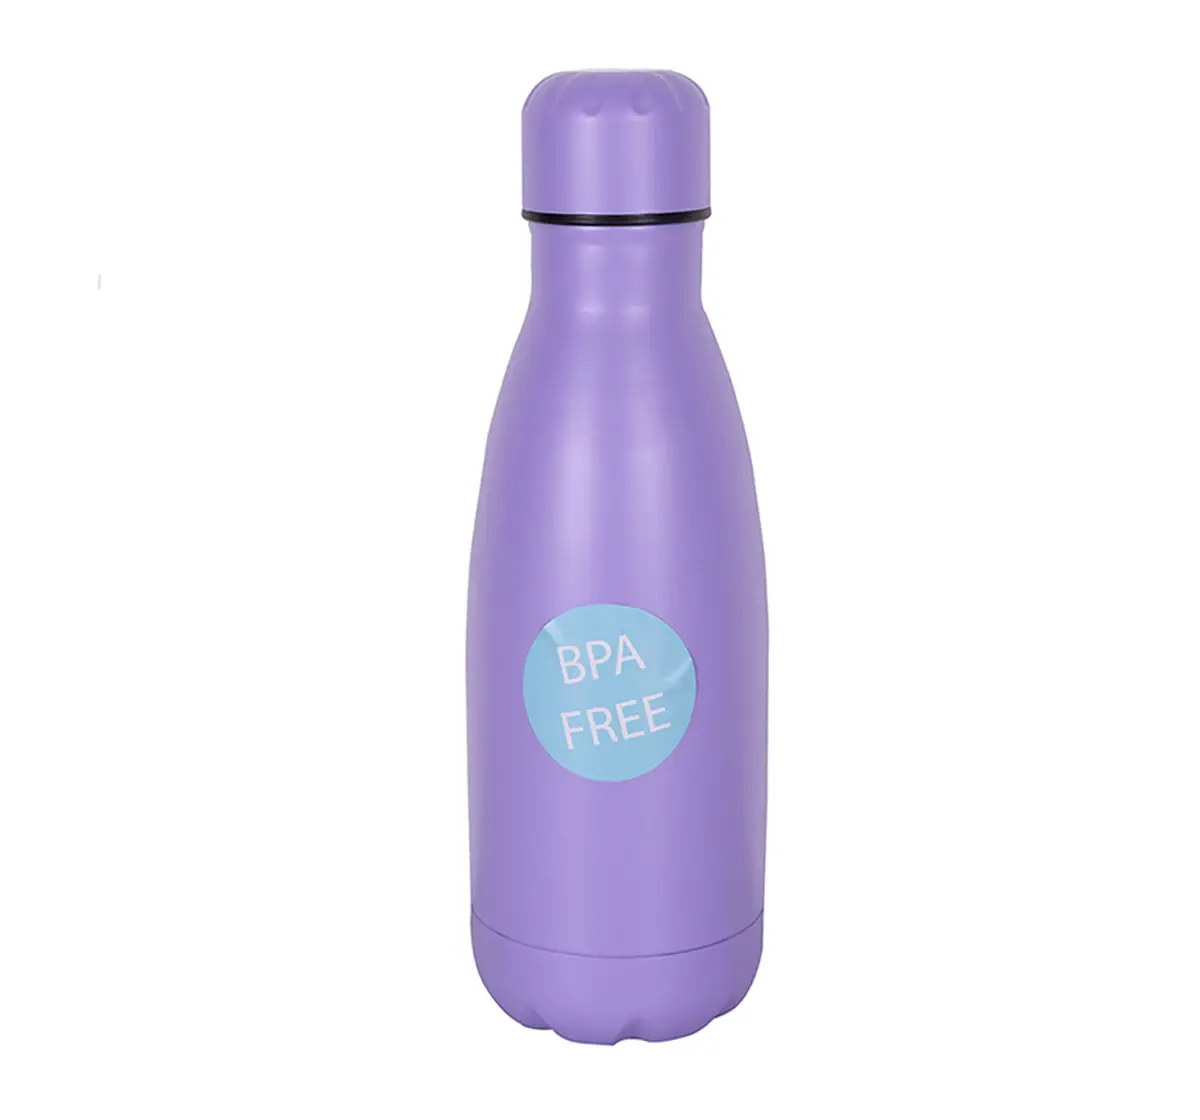 Stainless Steel Insulated Water Bottle by Hamster London for Kids, Purple, Non-Toxic, BPA Free, 350ml, 5Y+